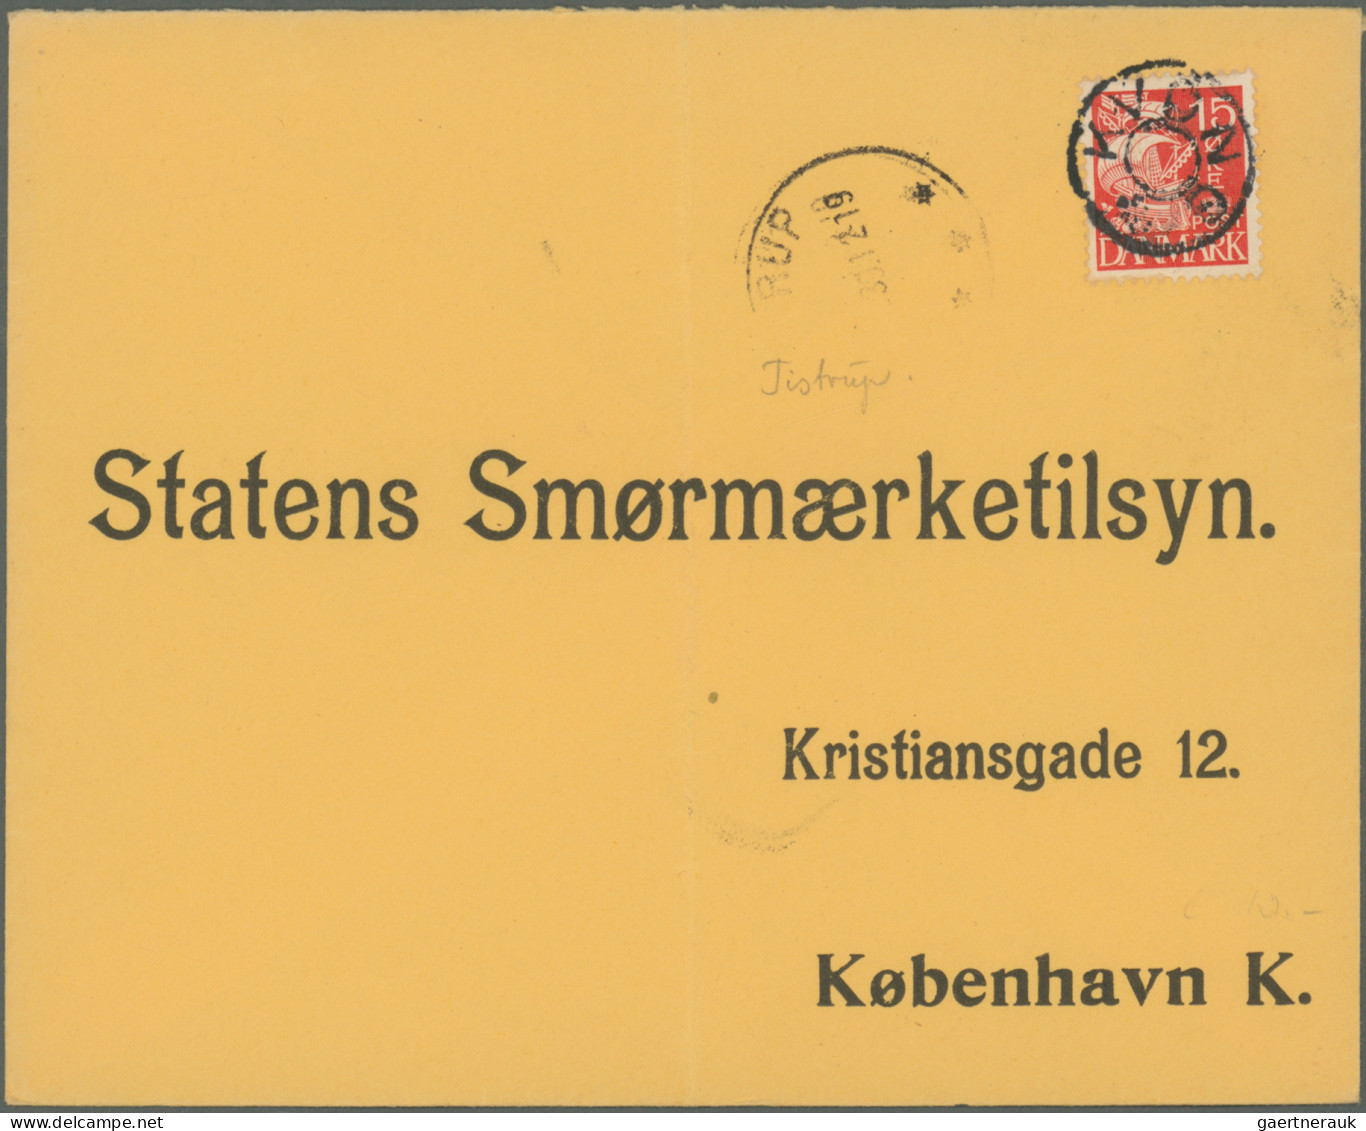 Denmark: 1860/1990 (ca.), balance of apprx. 195 covers/cards, mainly commercial